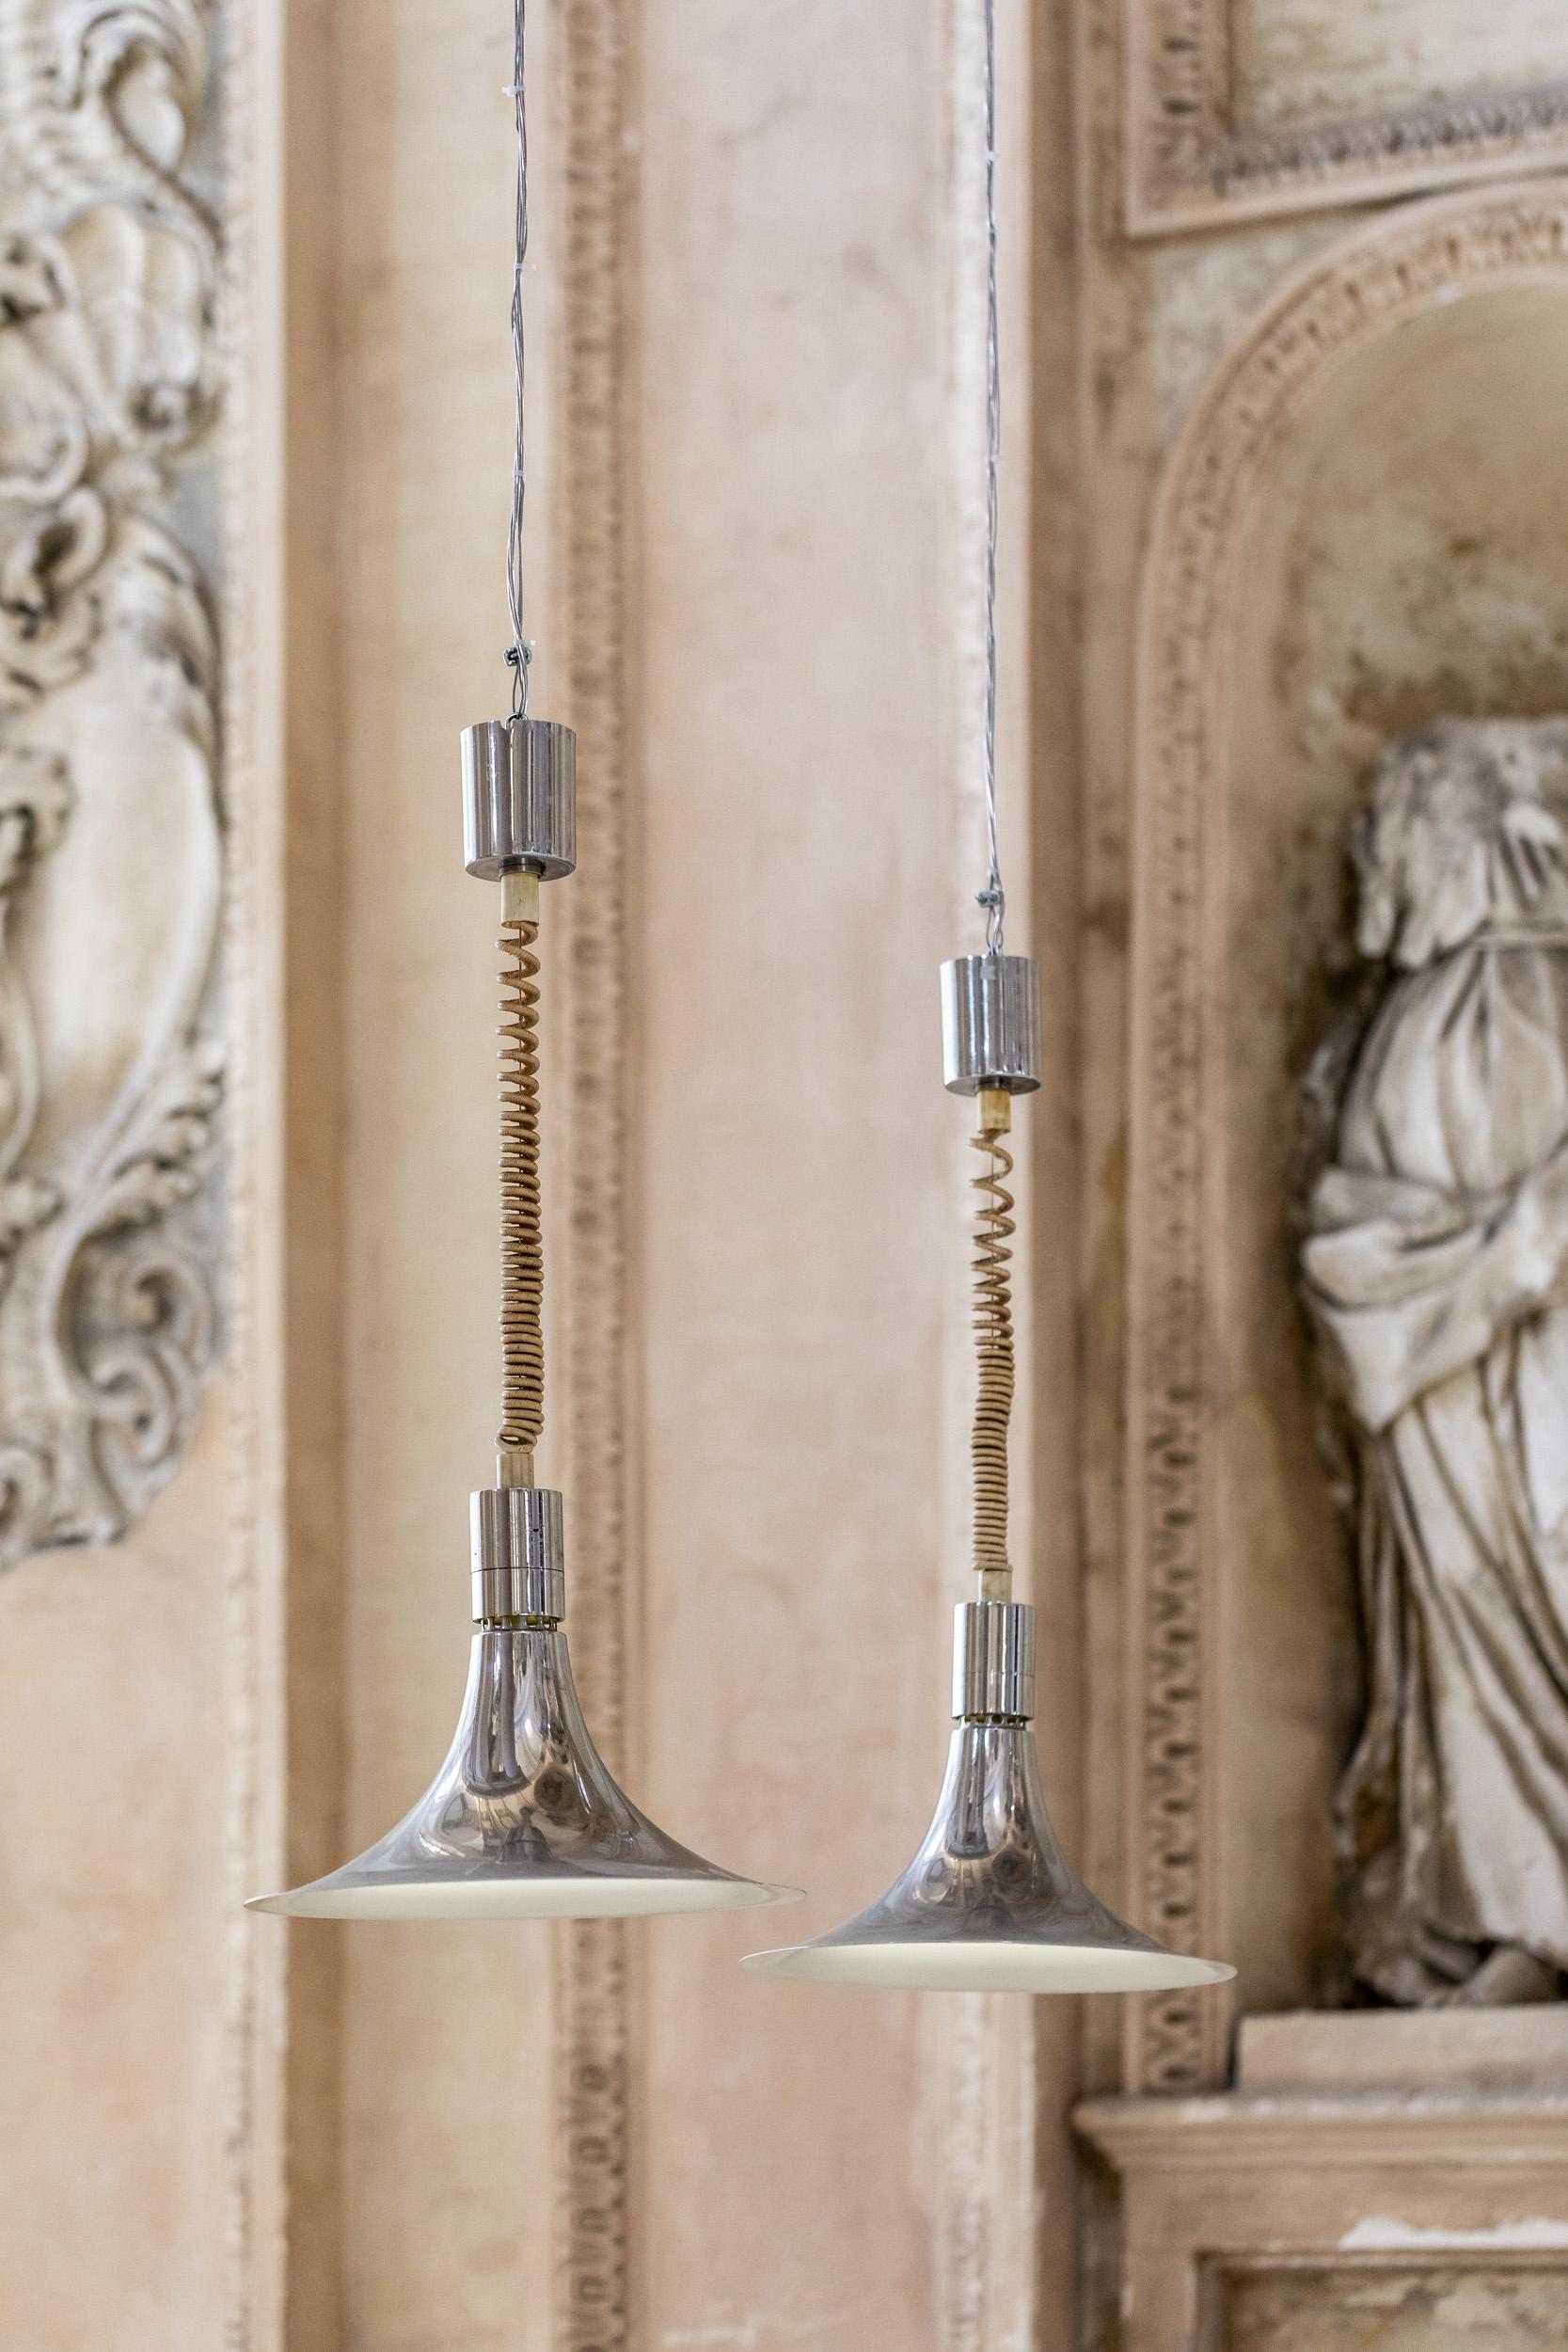 Sirrah pendants designed by Franco Albini, Franca Helg and Antonio Piva.
Adjustable height with 